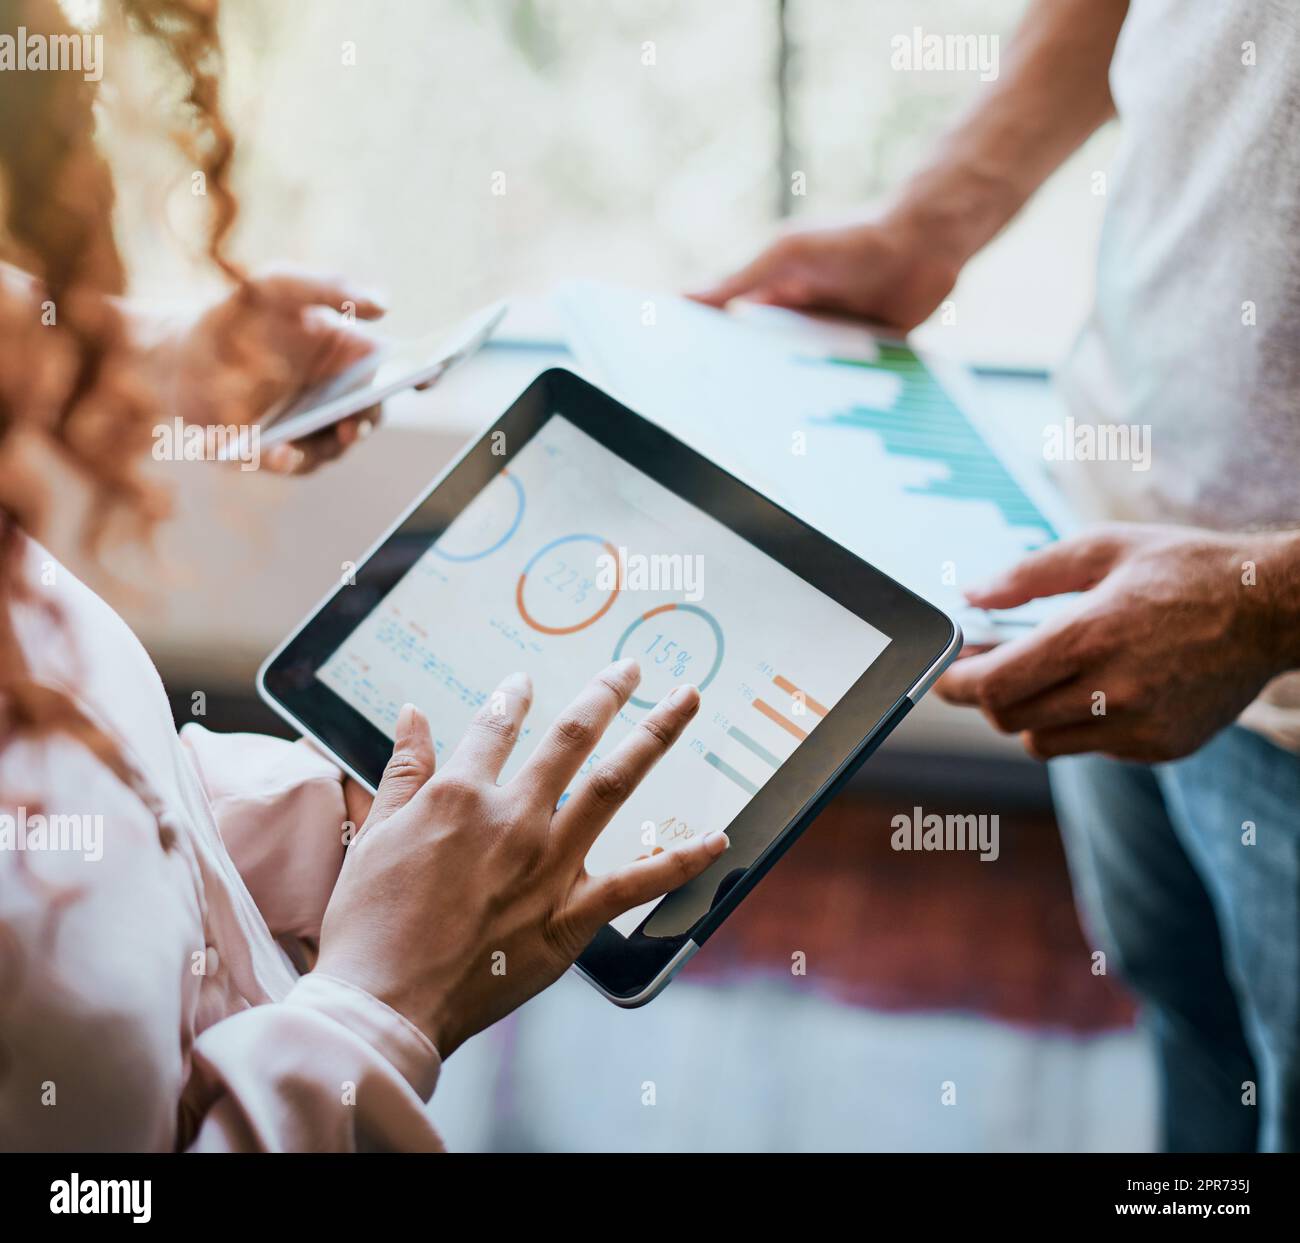 The calculations have been made. Shot of two unrecognizable peoples hands working on a tablet and looking at the businesss charts in the office. Stock Photo